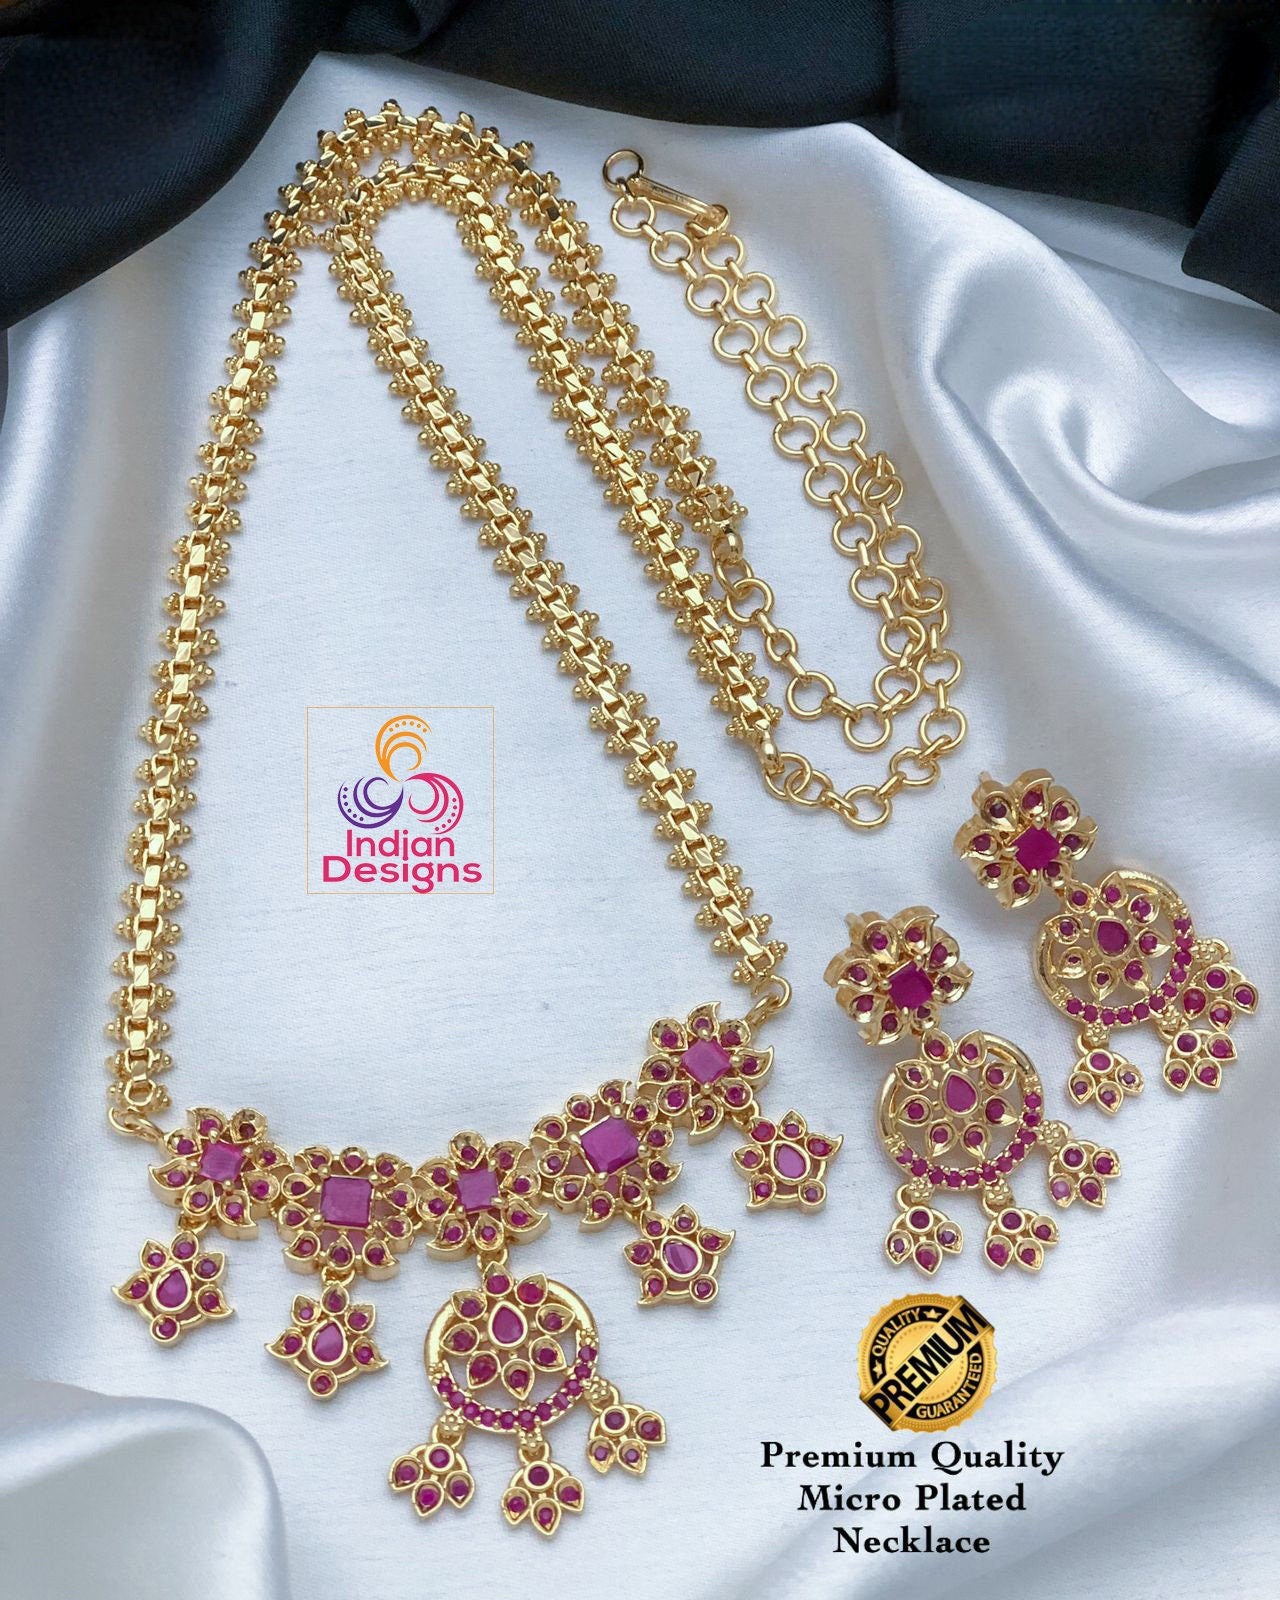 22K Gold Plated Haram necklace and earring set with floral design|Traditional South Indian Jewelry|Bollywood Style CZ American Diamond Set